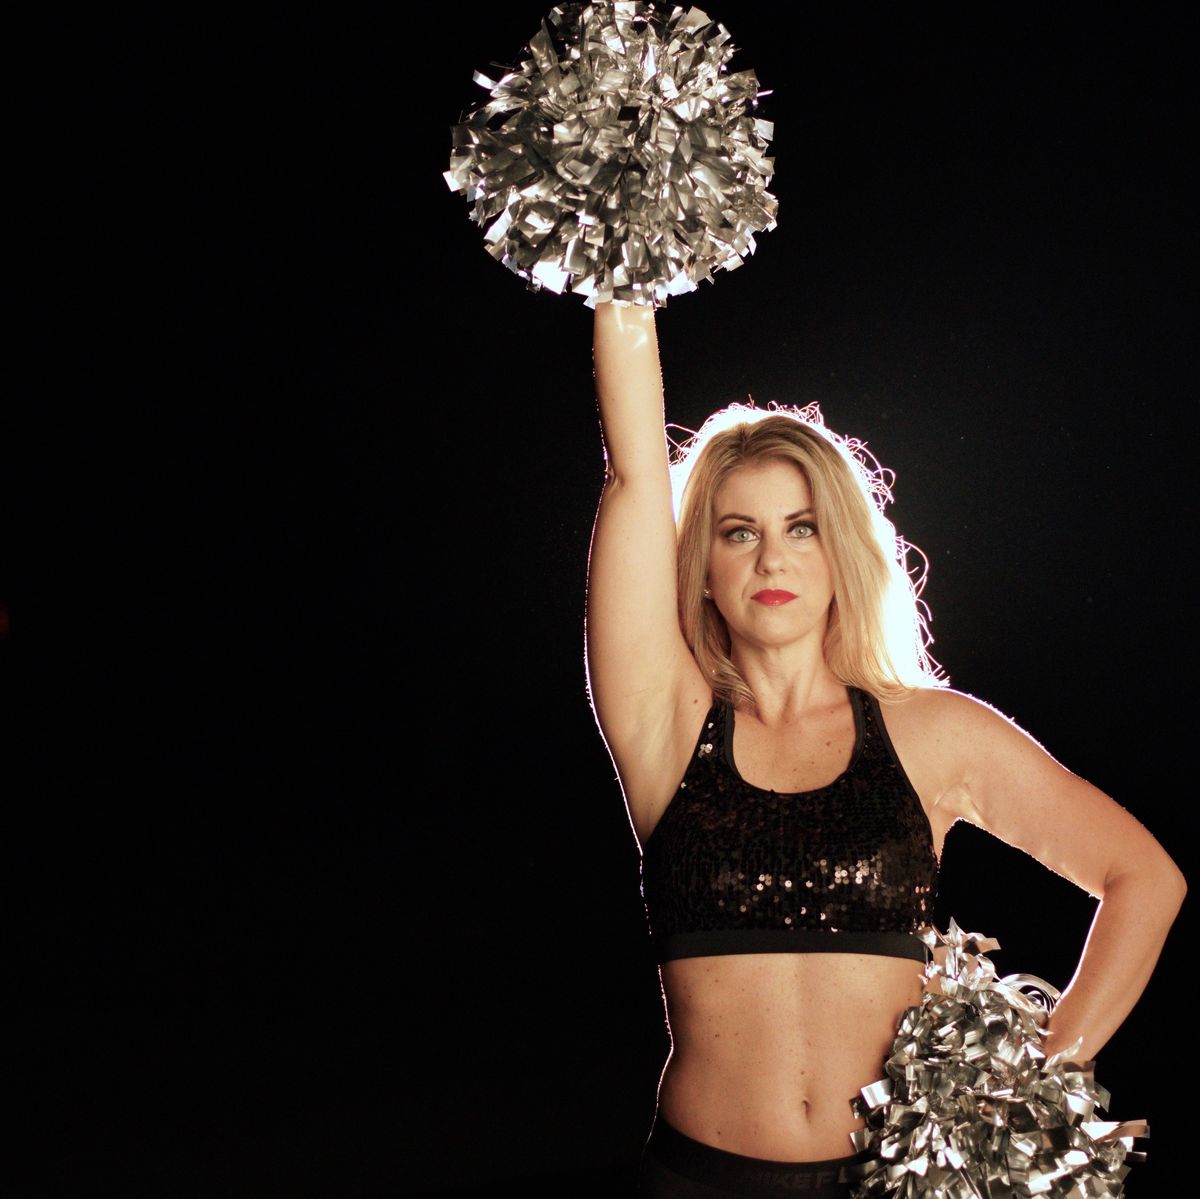 NFL Cheerleaders Struggle for Labor Rights in 'A Woman's Work